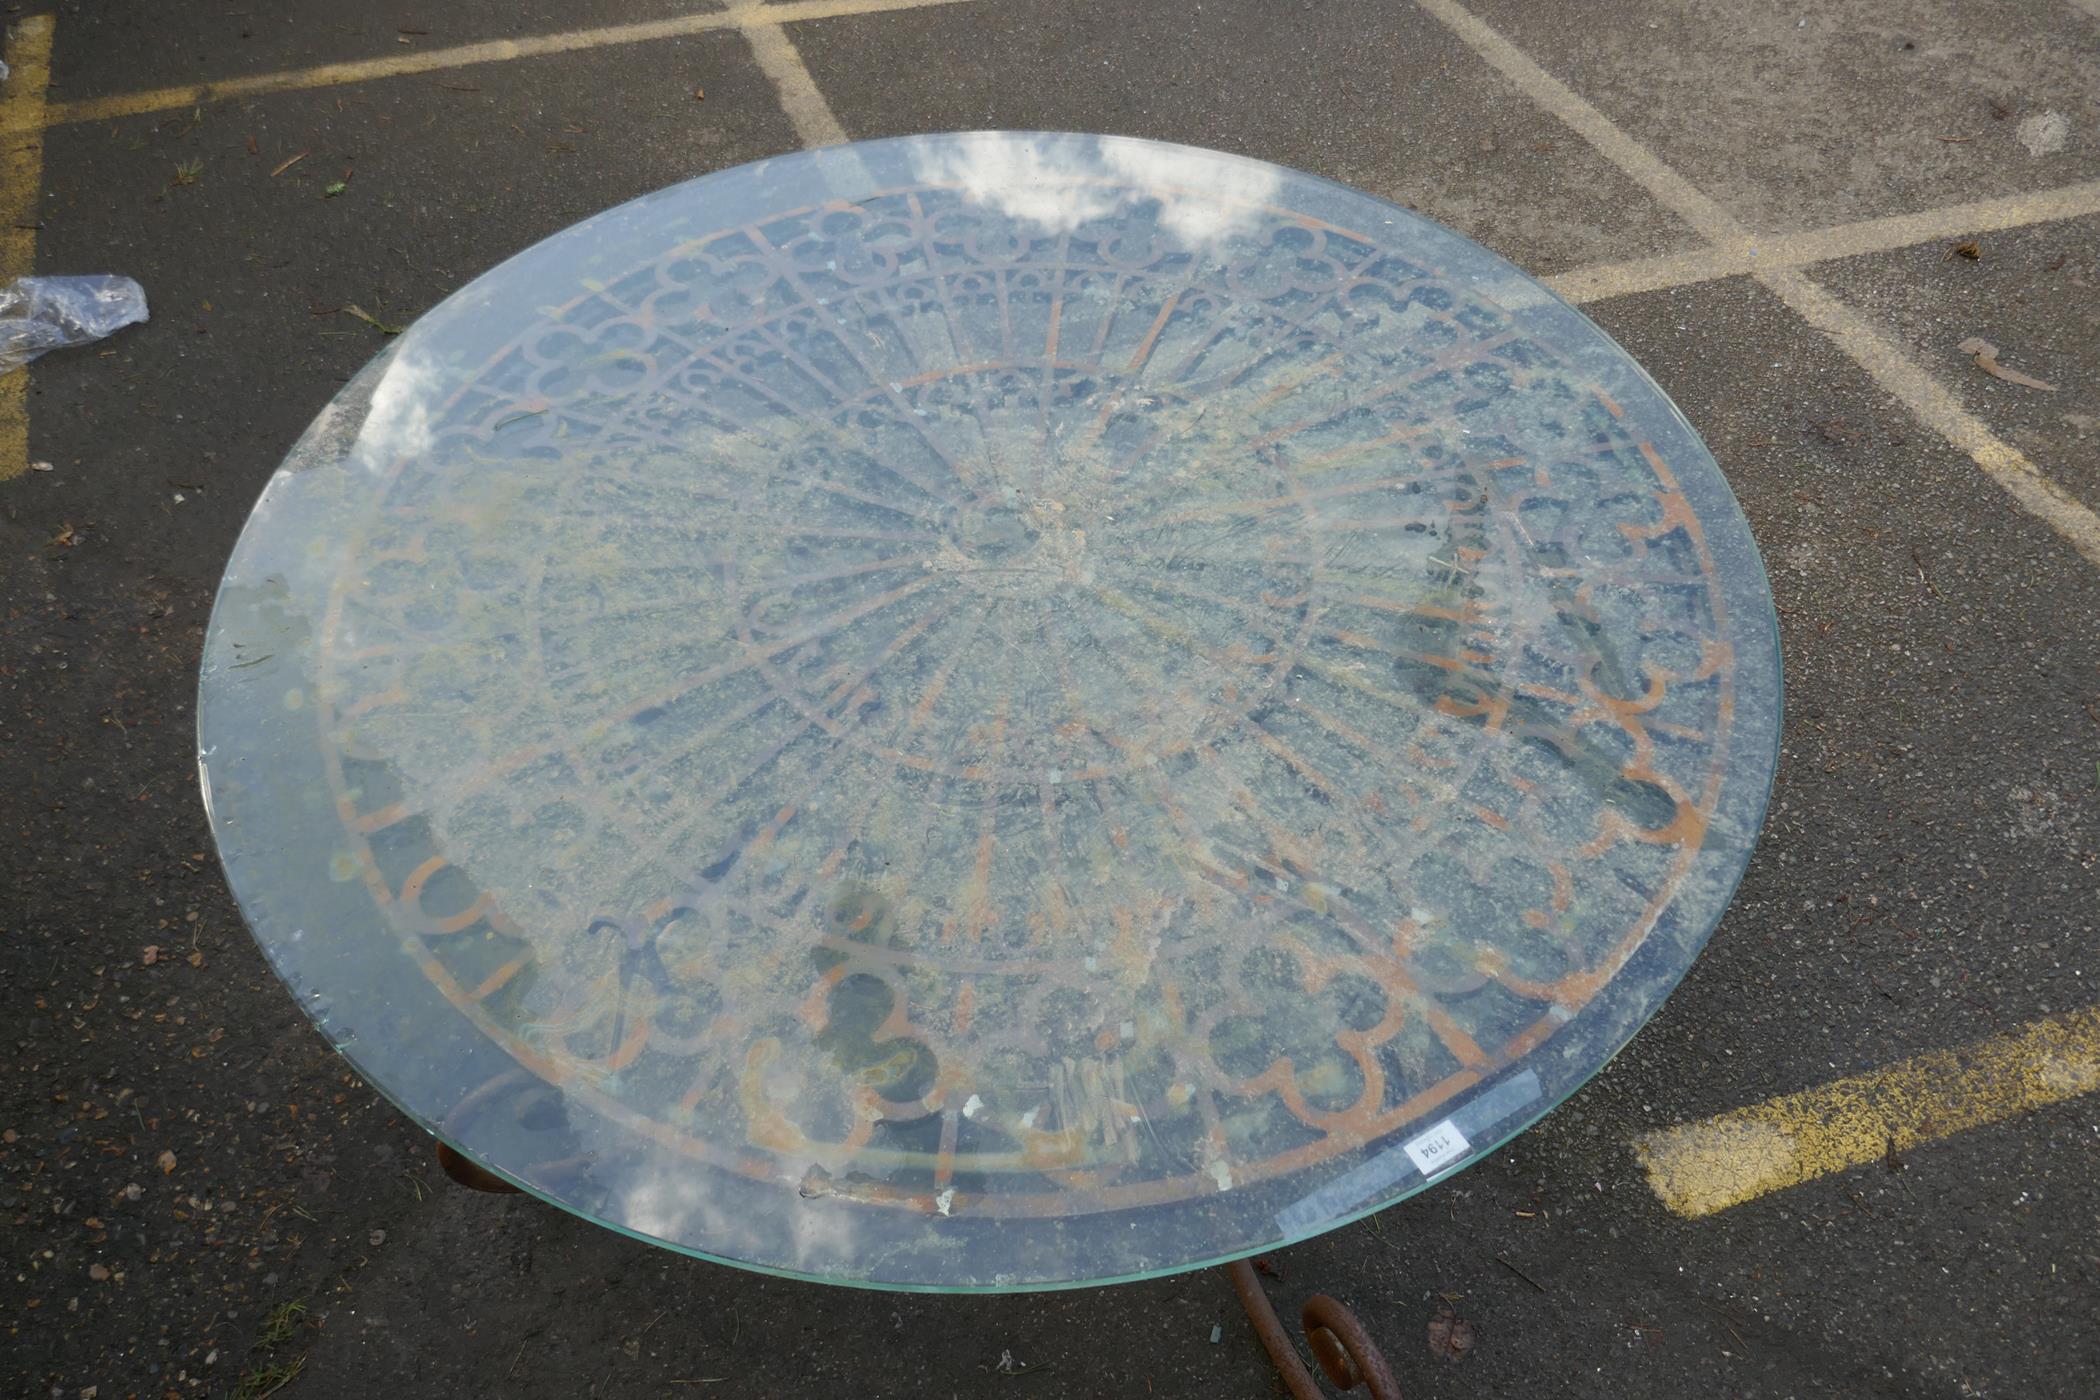 A wrought iron garden / conservatory table with plate glass top, 53" diameter, 30" high - Image 2 of 2